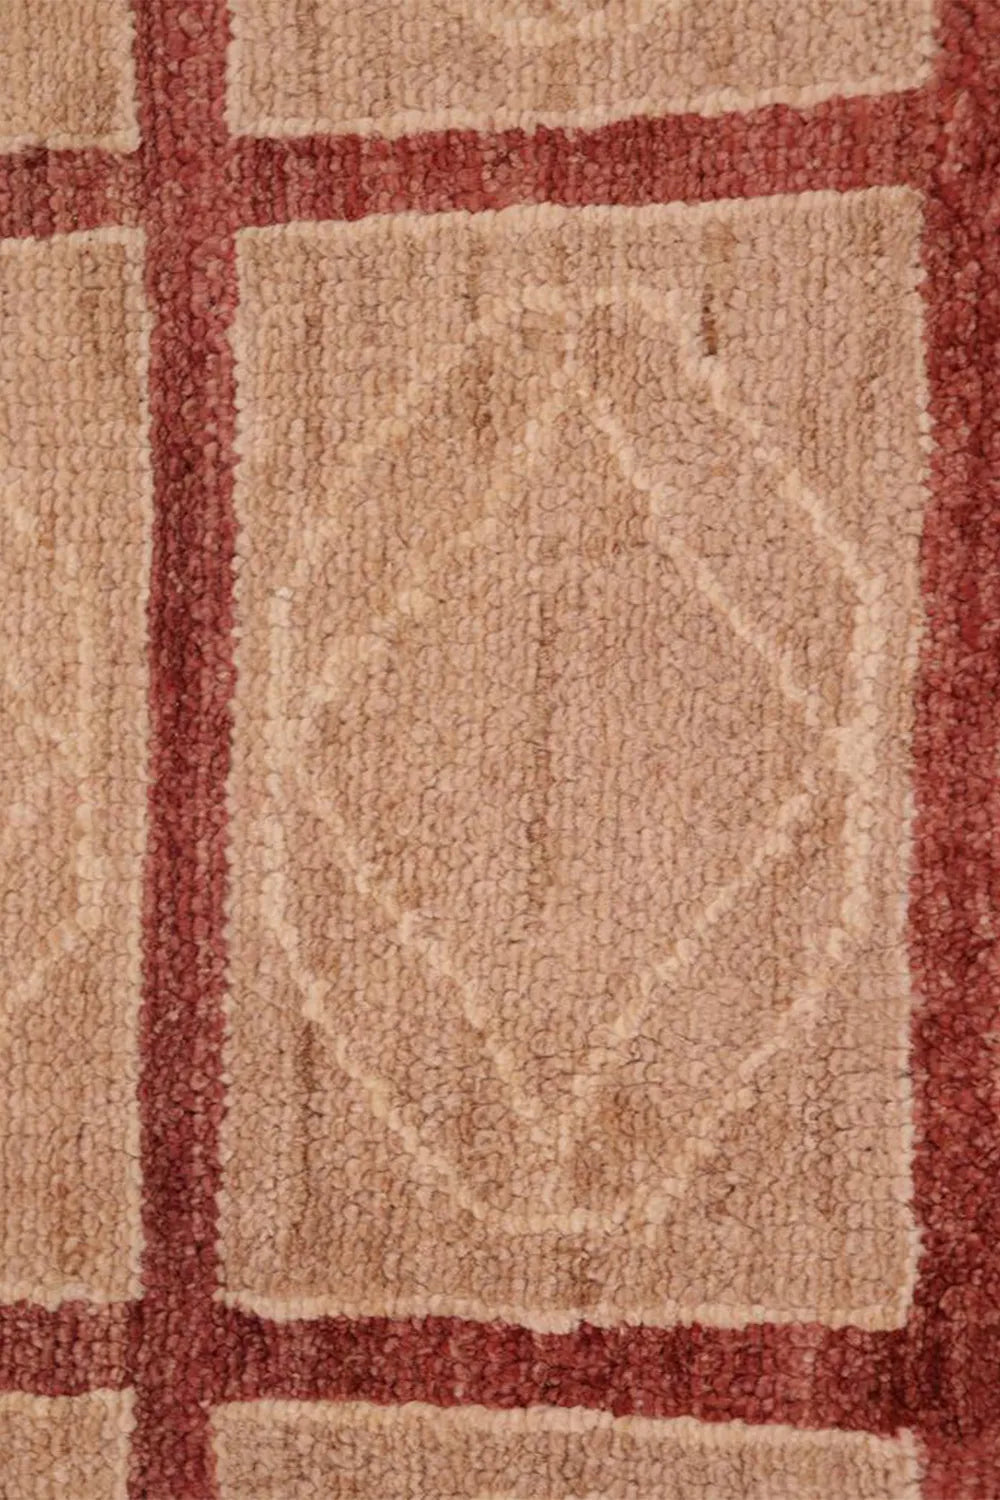 Premium New Zealand Wool Turkish Rug, an heirloom-quality home accent.